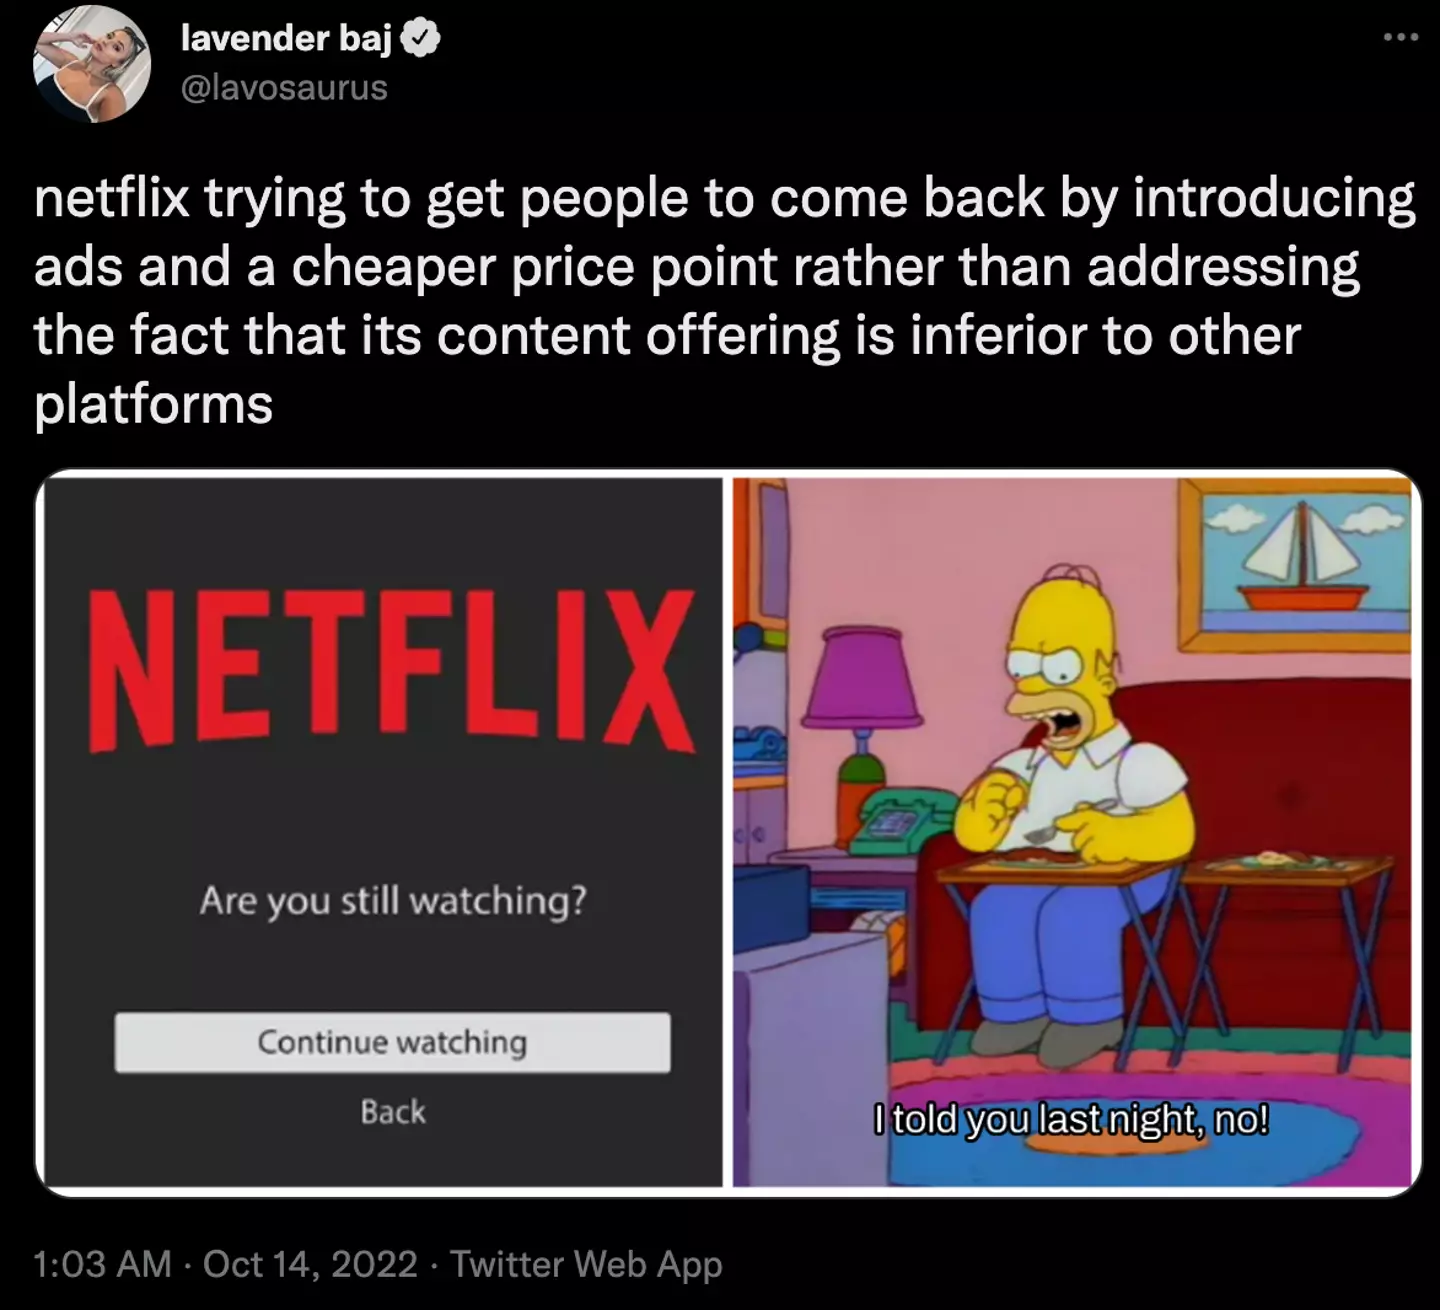 Many subscribers don't think the decision will actually help Netflix retain subscribers.